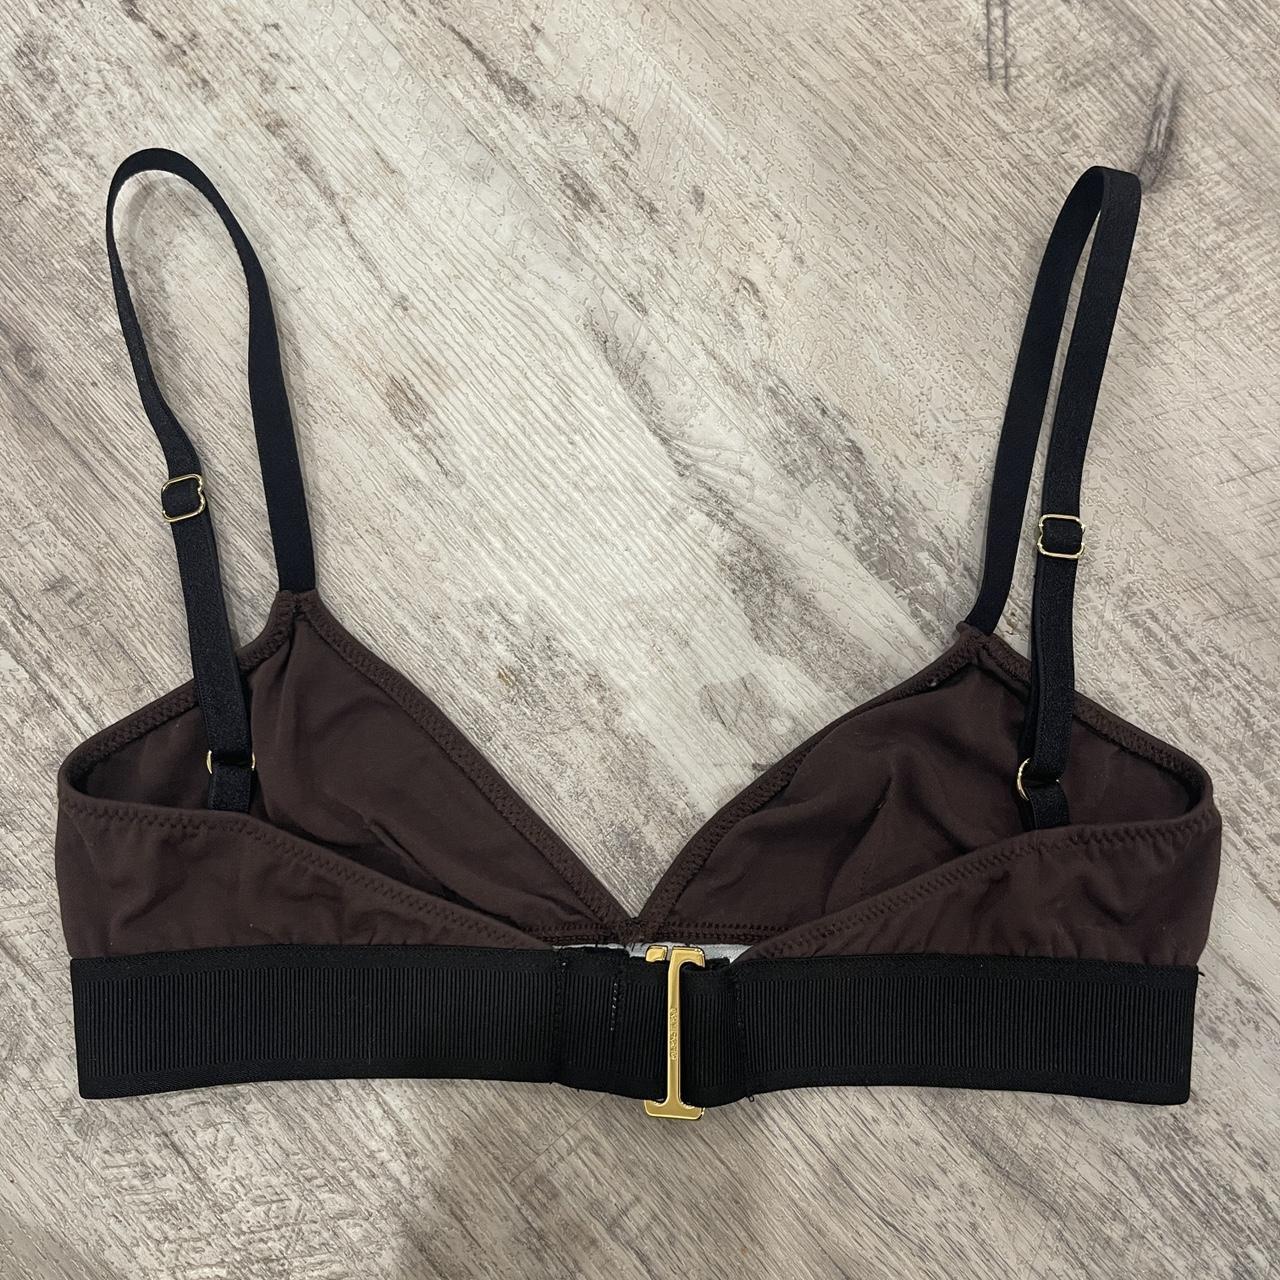 TOM FORD Women's Black and Brown Bra (2)